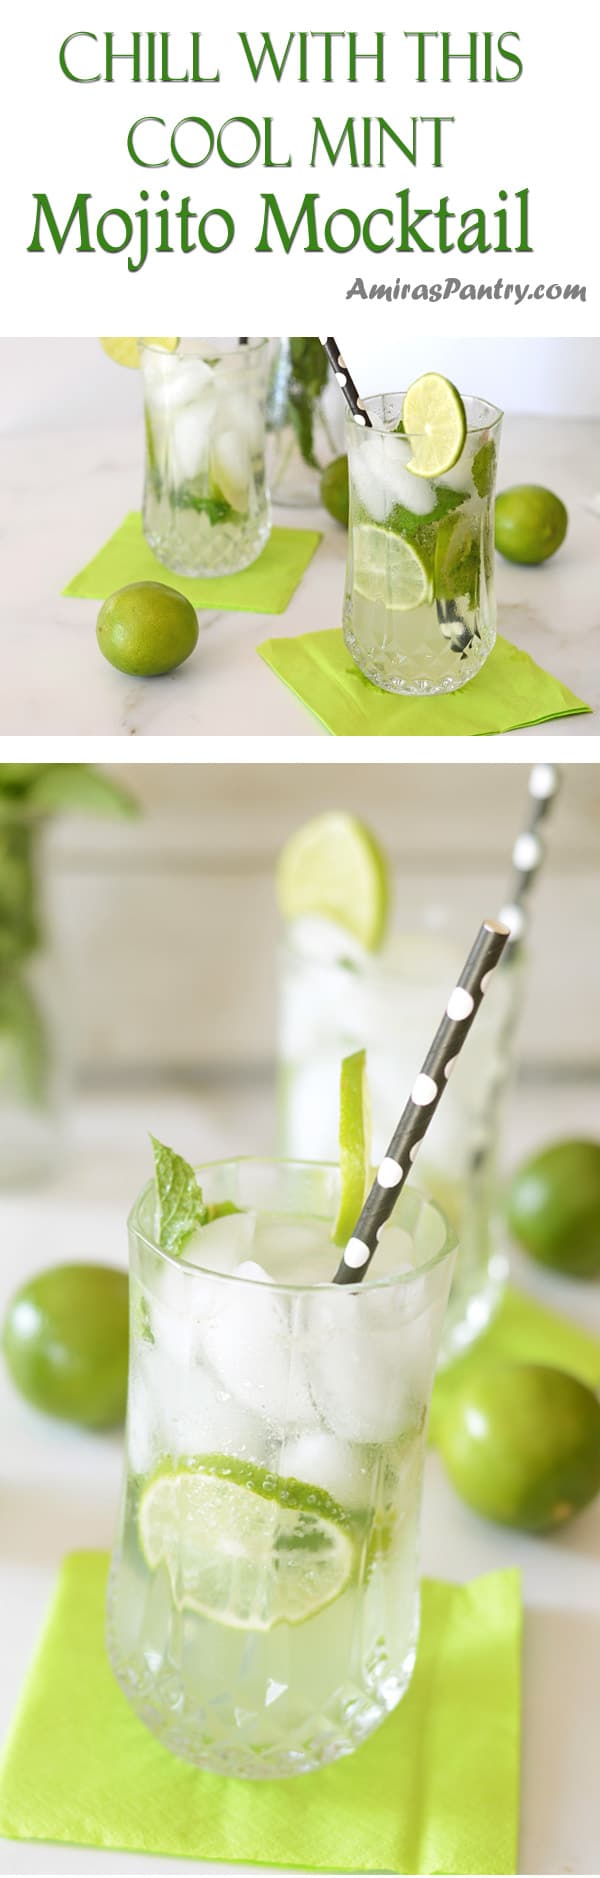 A photo showing a glass with mint mojito and lemons